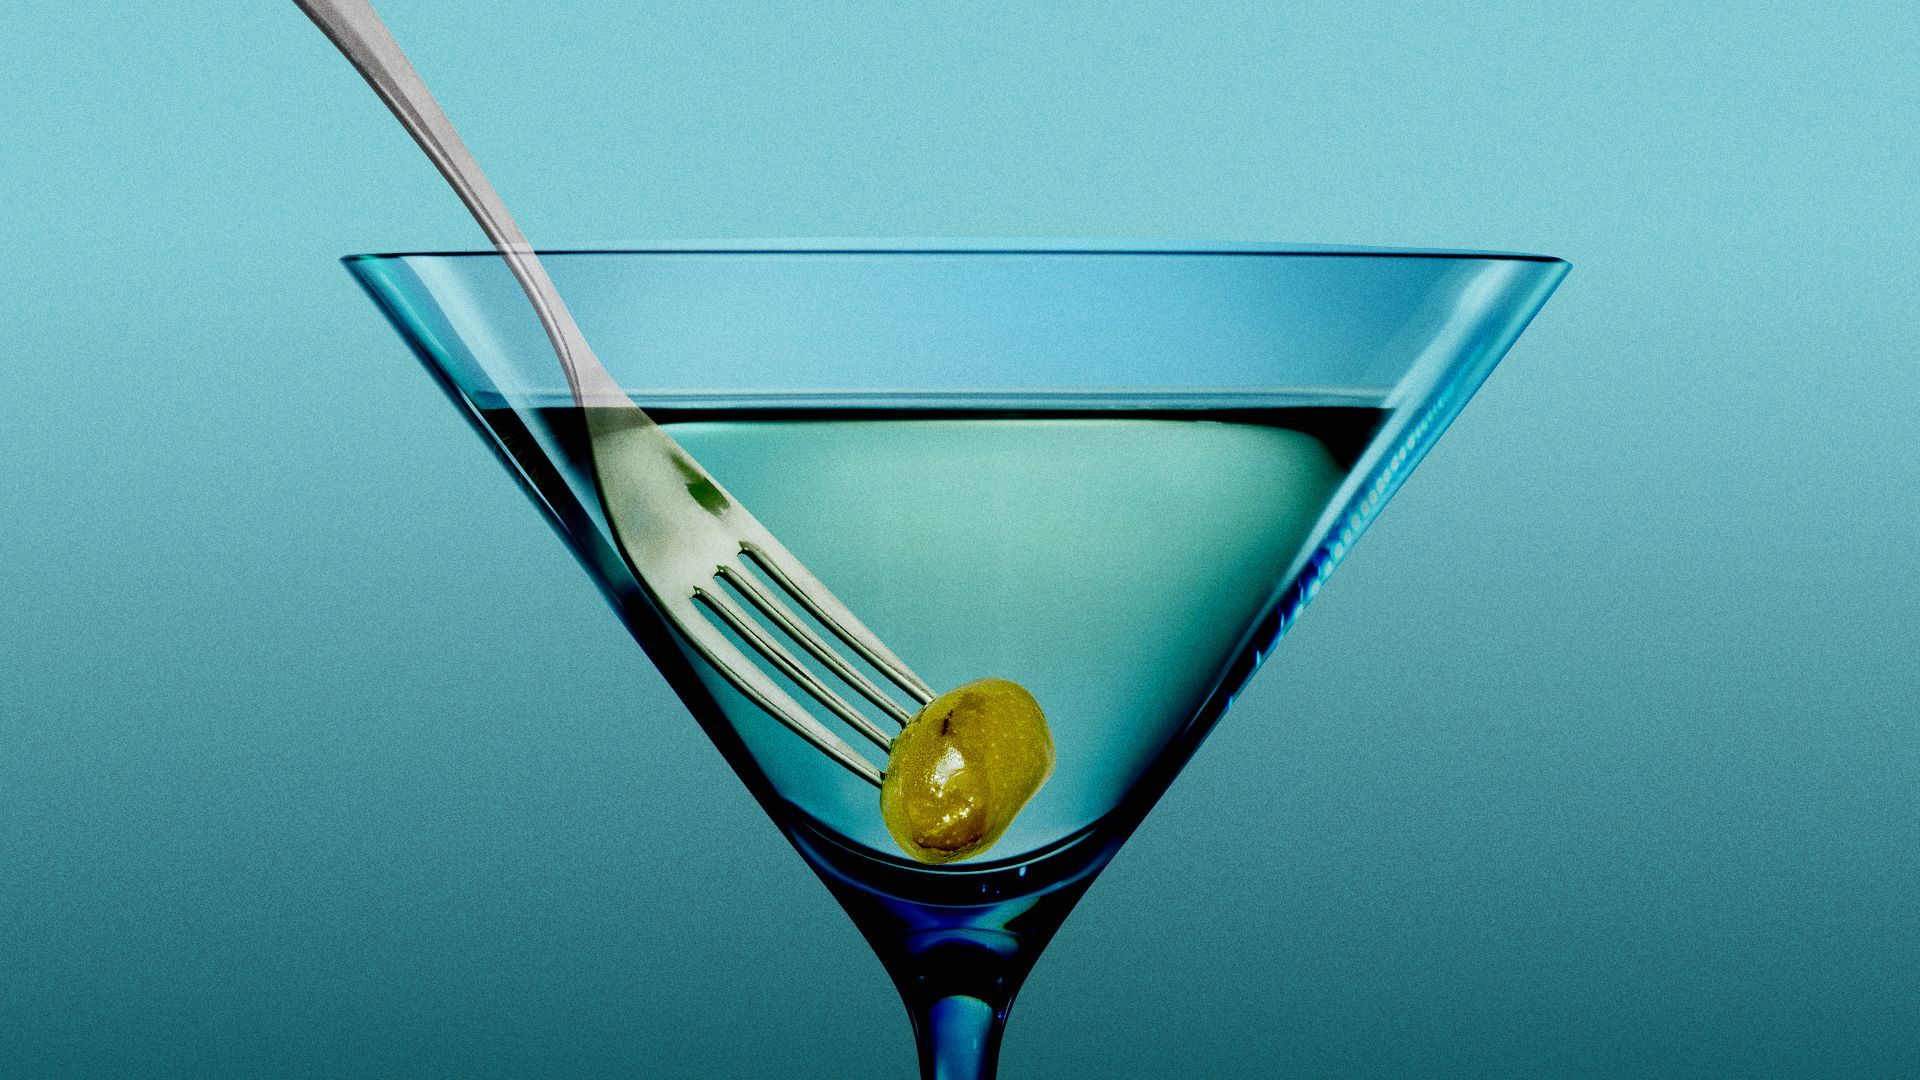 Illustration of a fork in the olive of a martini glass. 